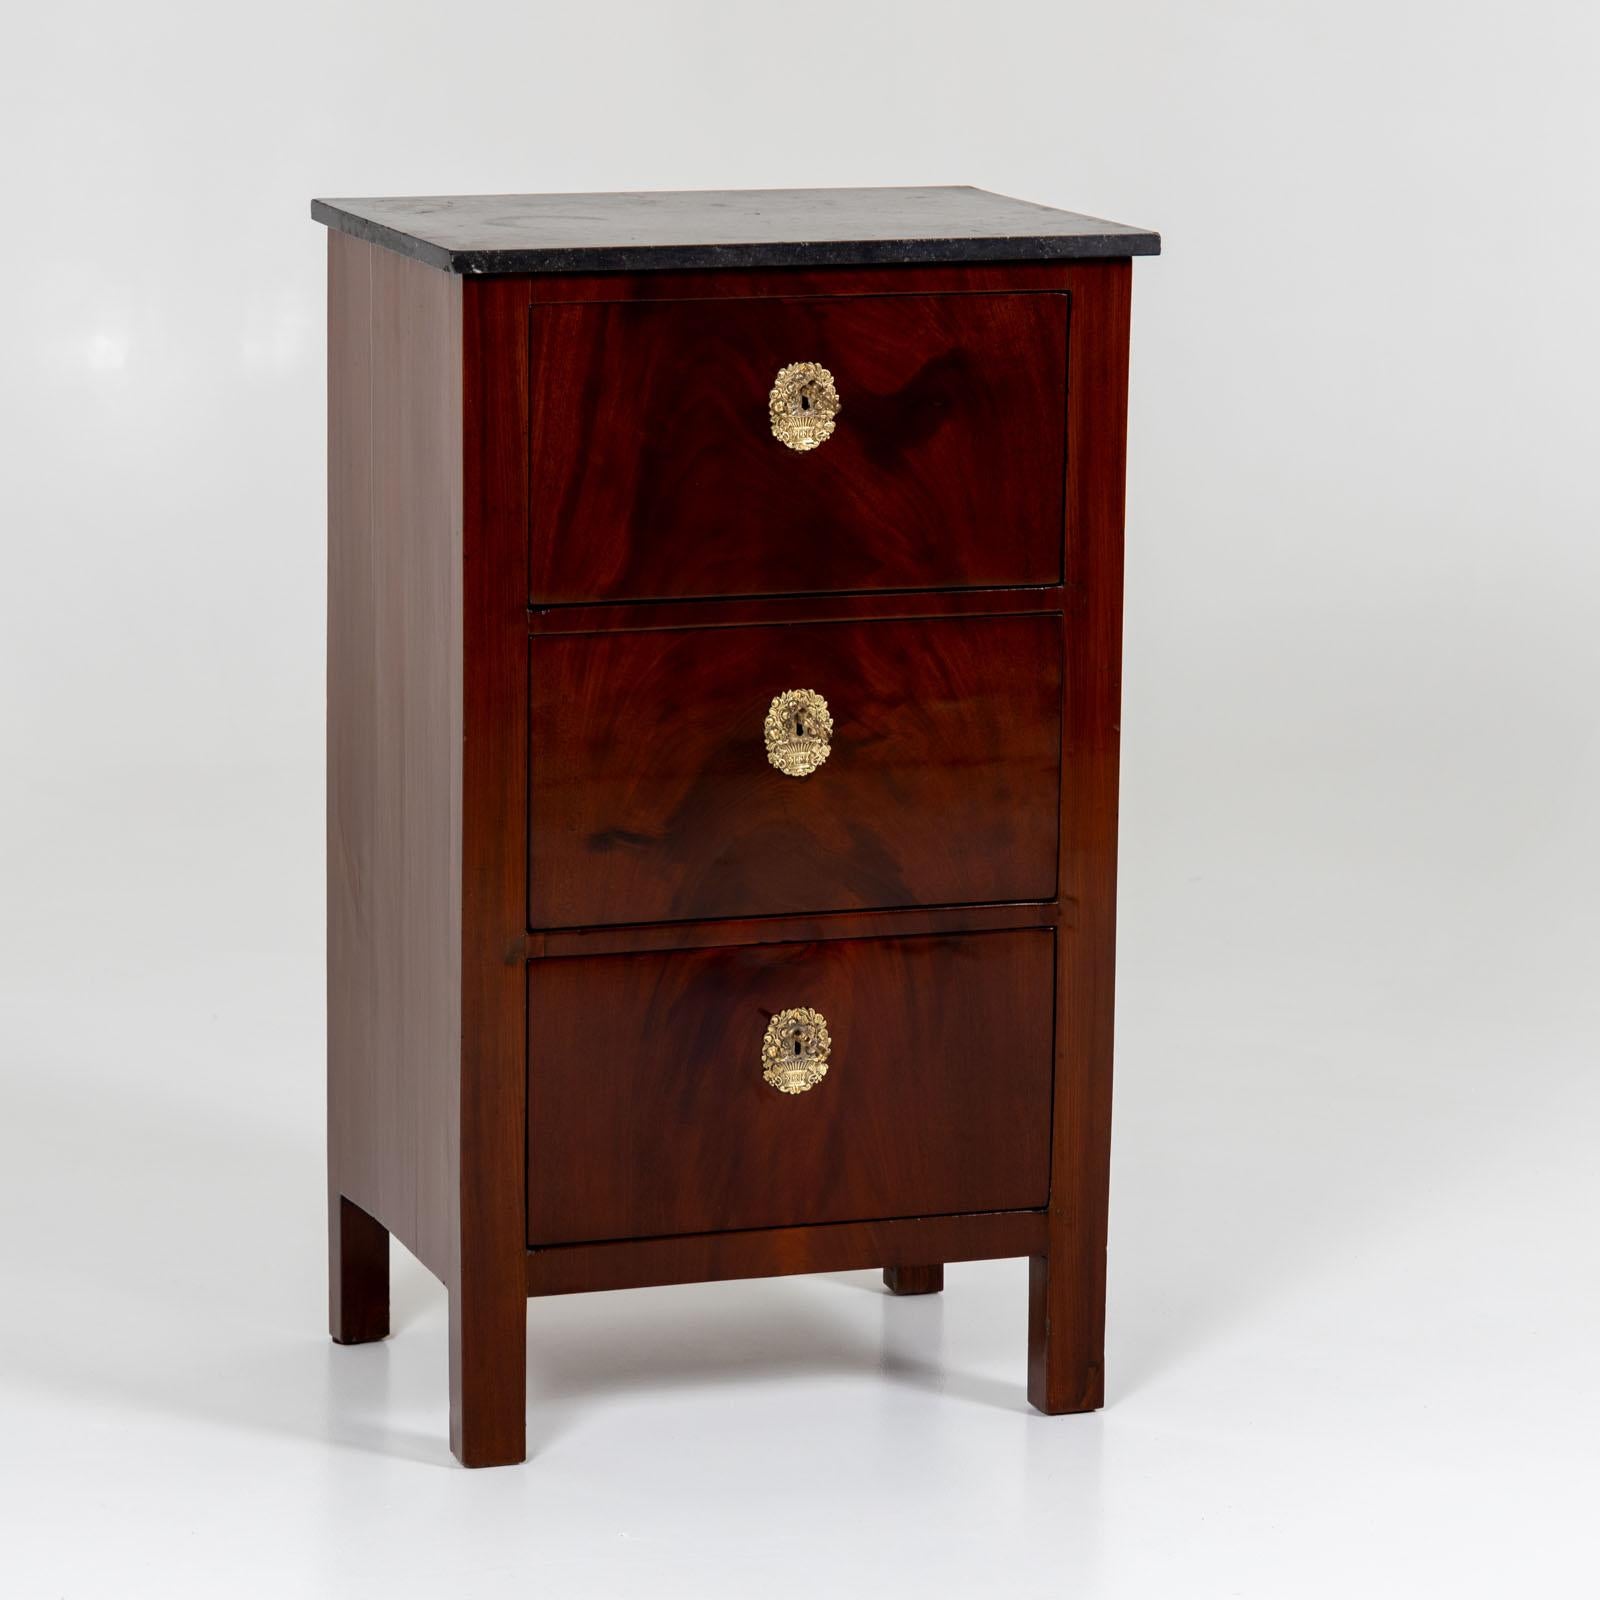 Narrow chest of drawers on straight legs with three drawers and a gray stone top. The key plates are in the form of flower bouquets in gilt bronze. The chest of drawers is mahogany veneered and has been polished by hand. 